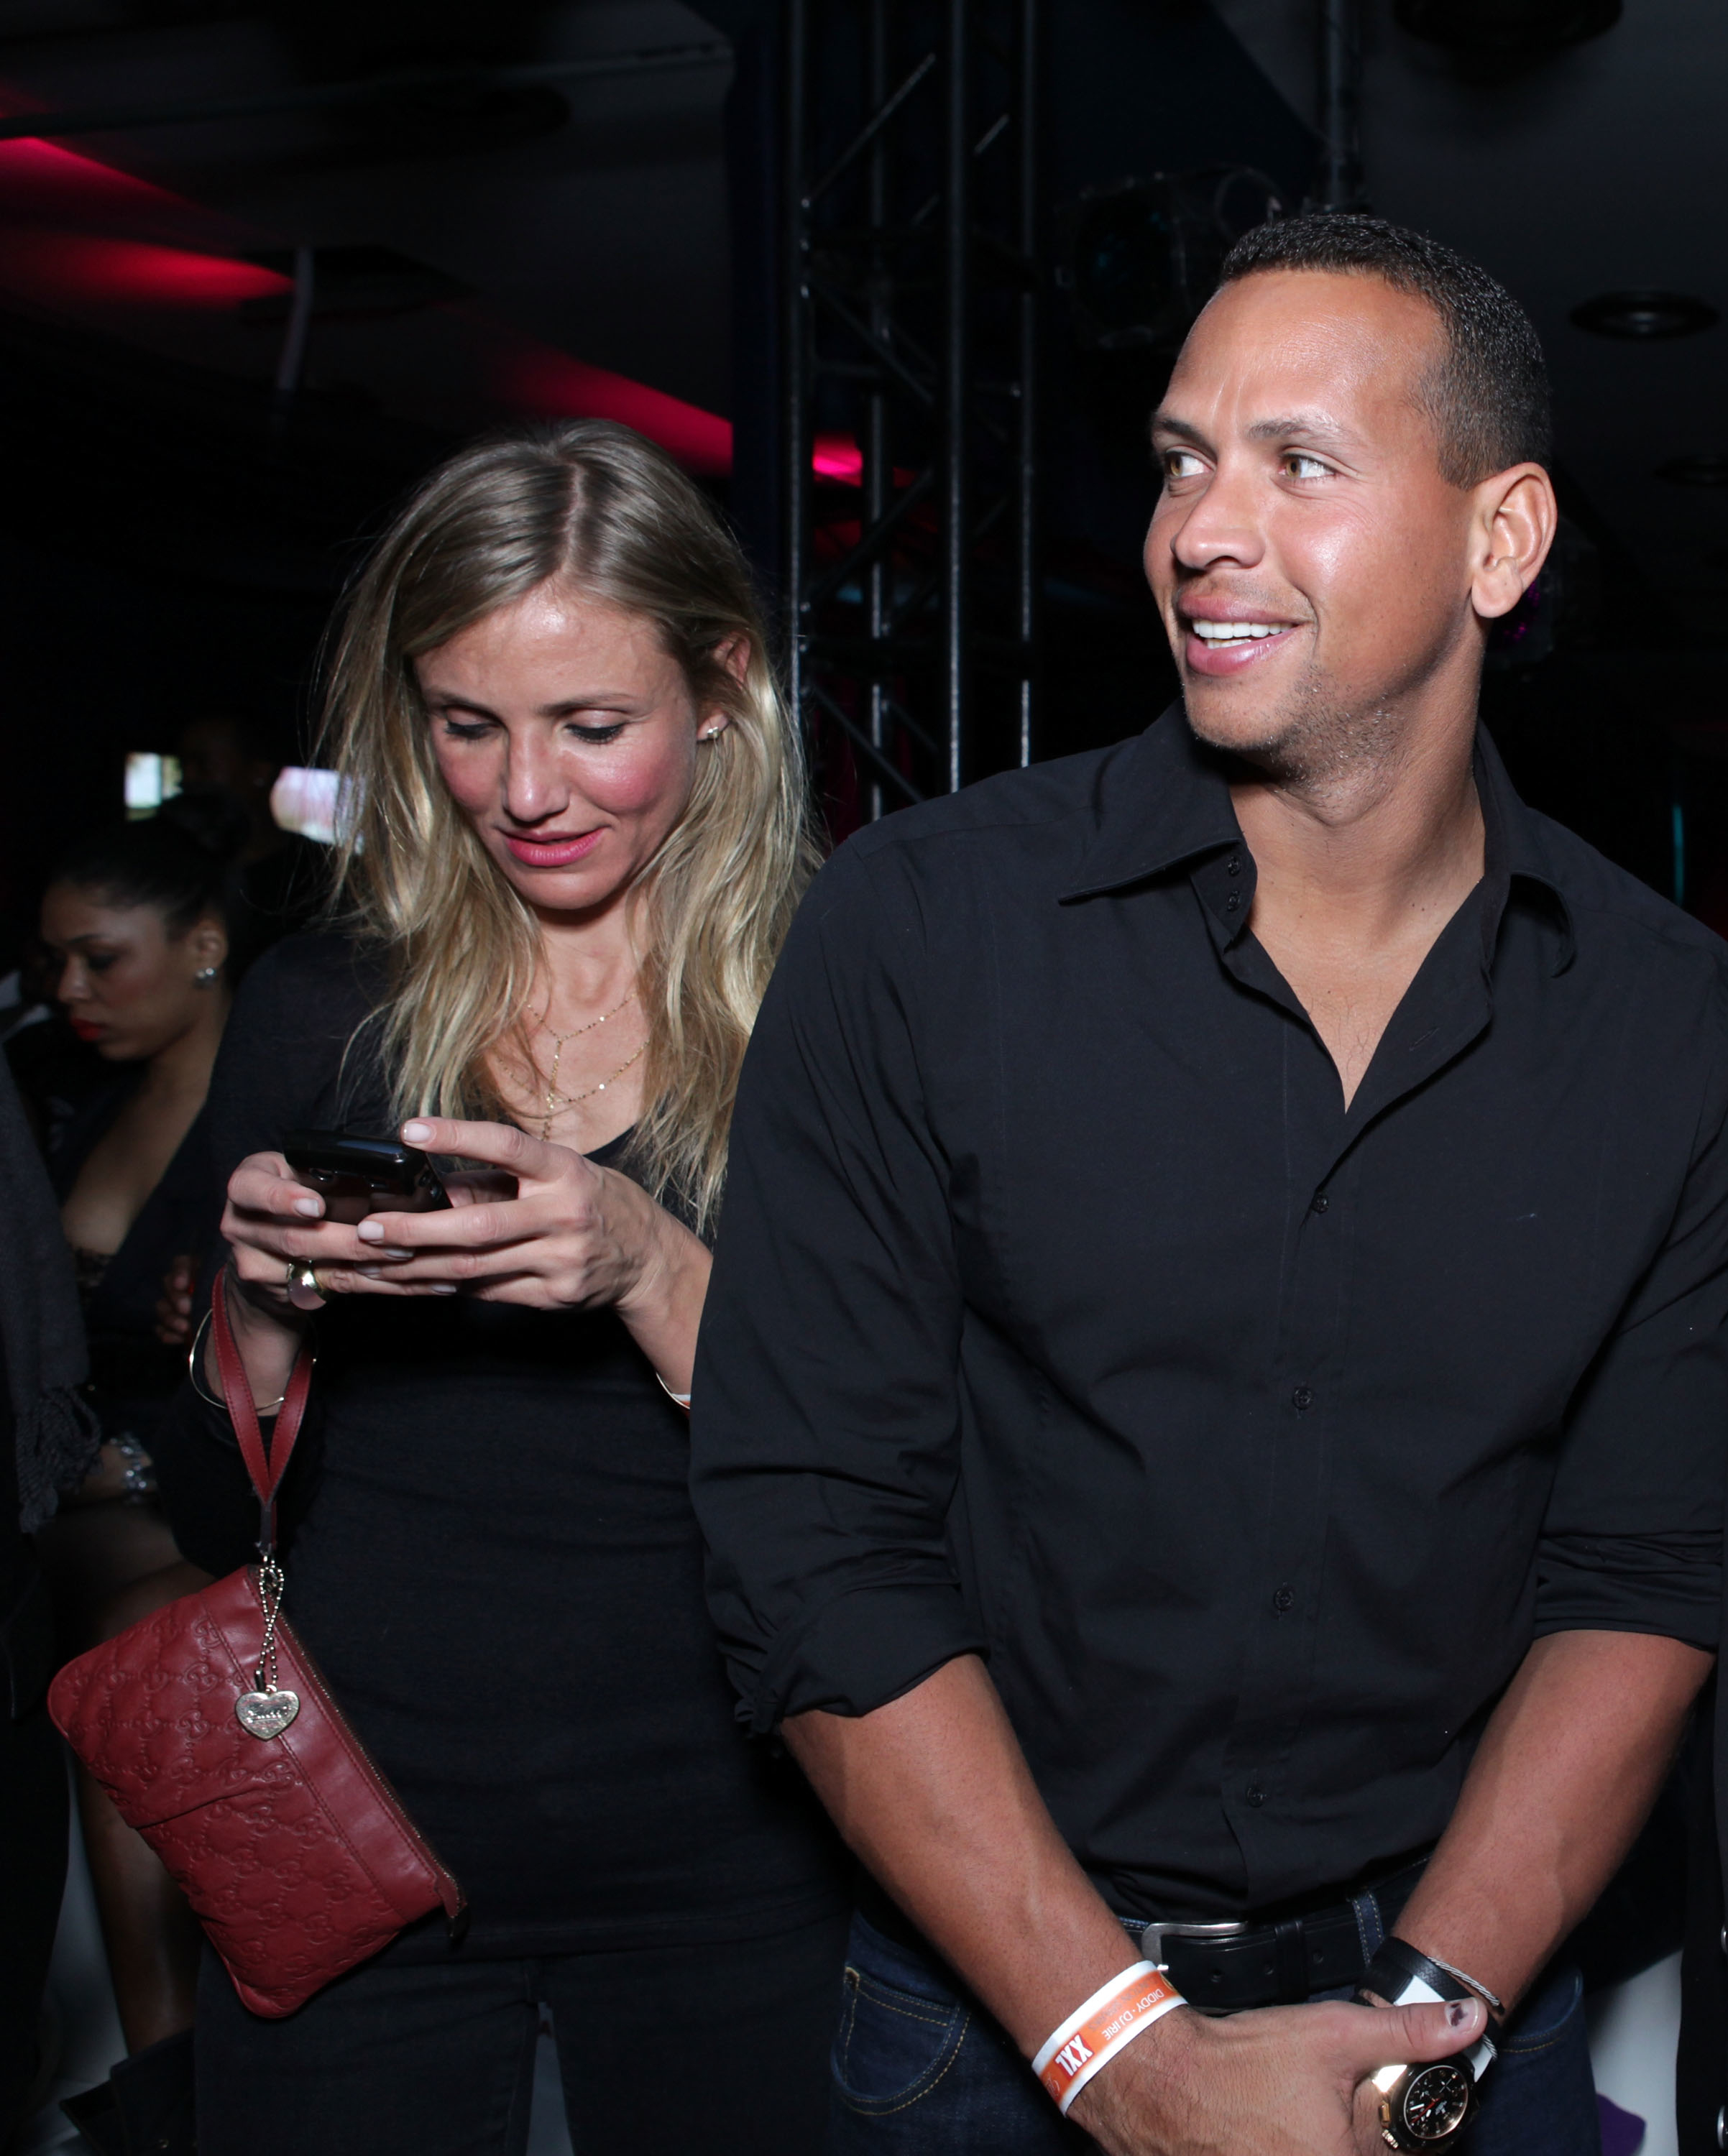 Cameron using a phone and standing next to A-Rod, both casually dressed